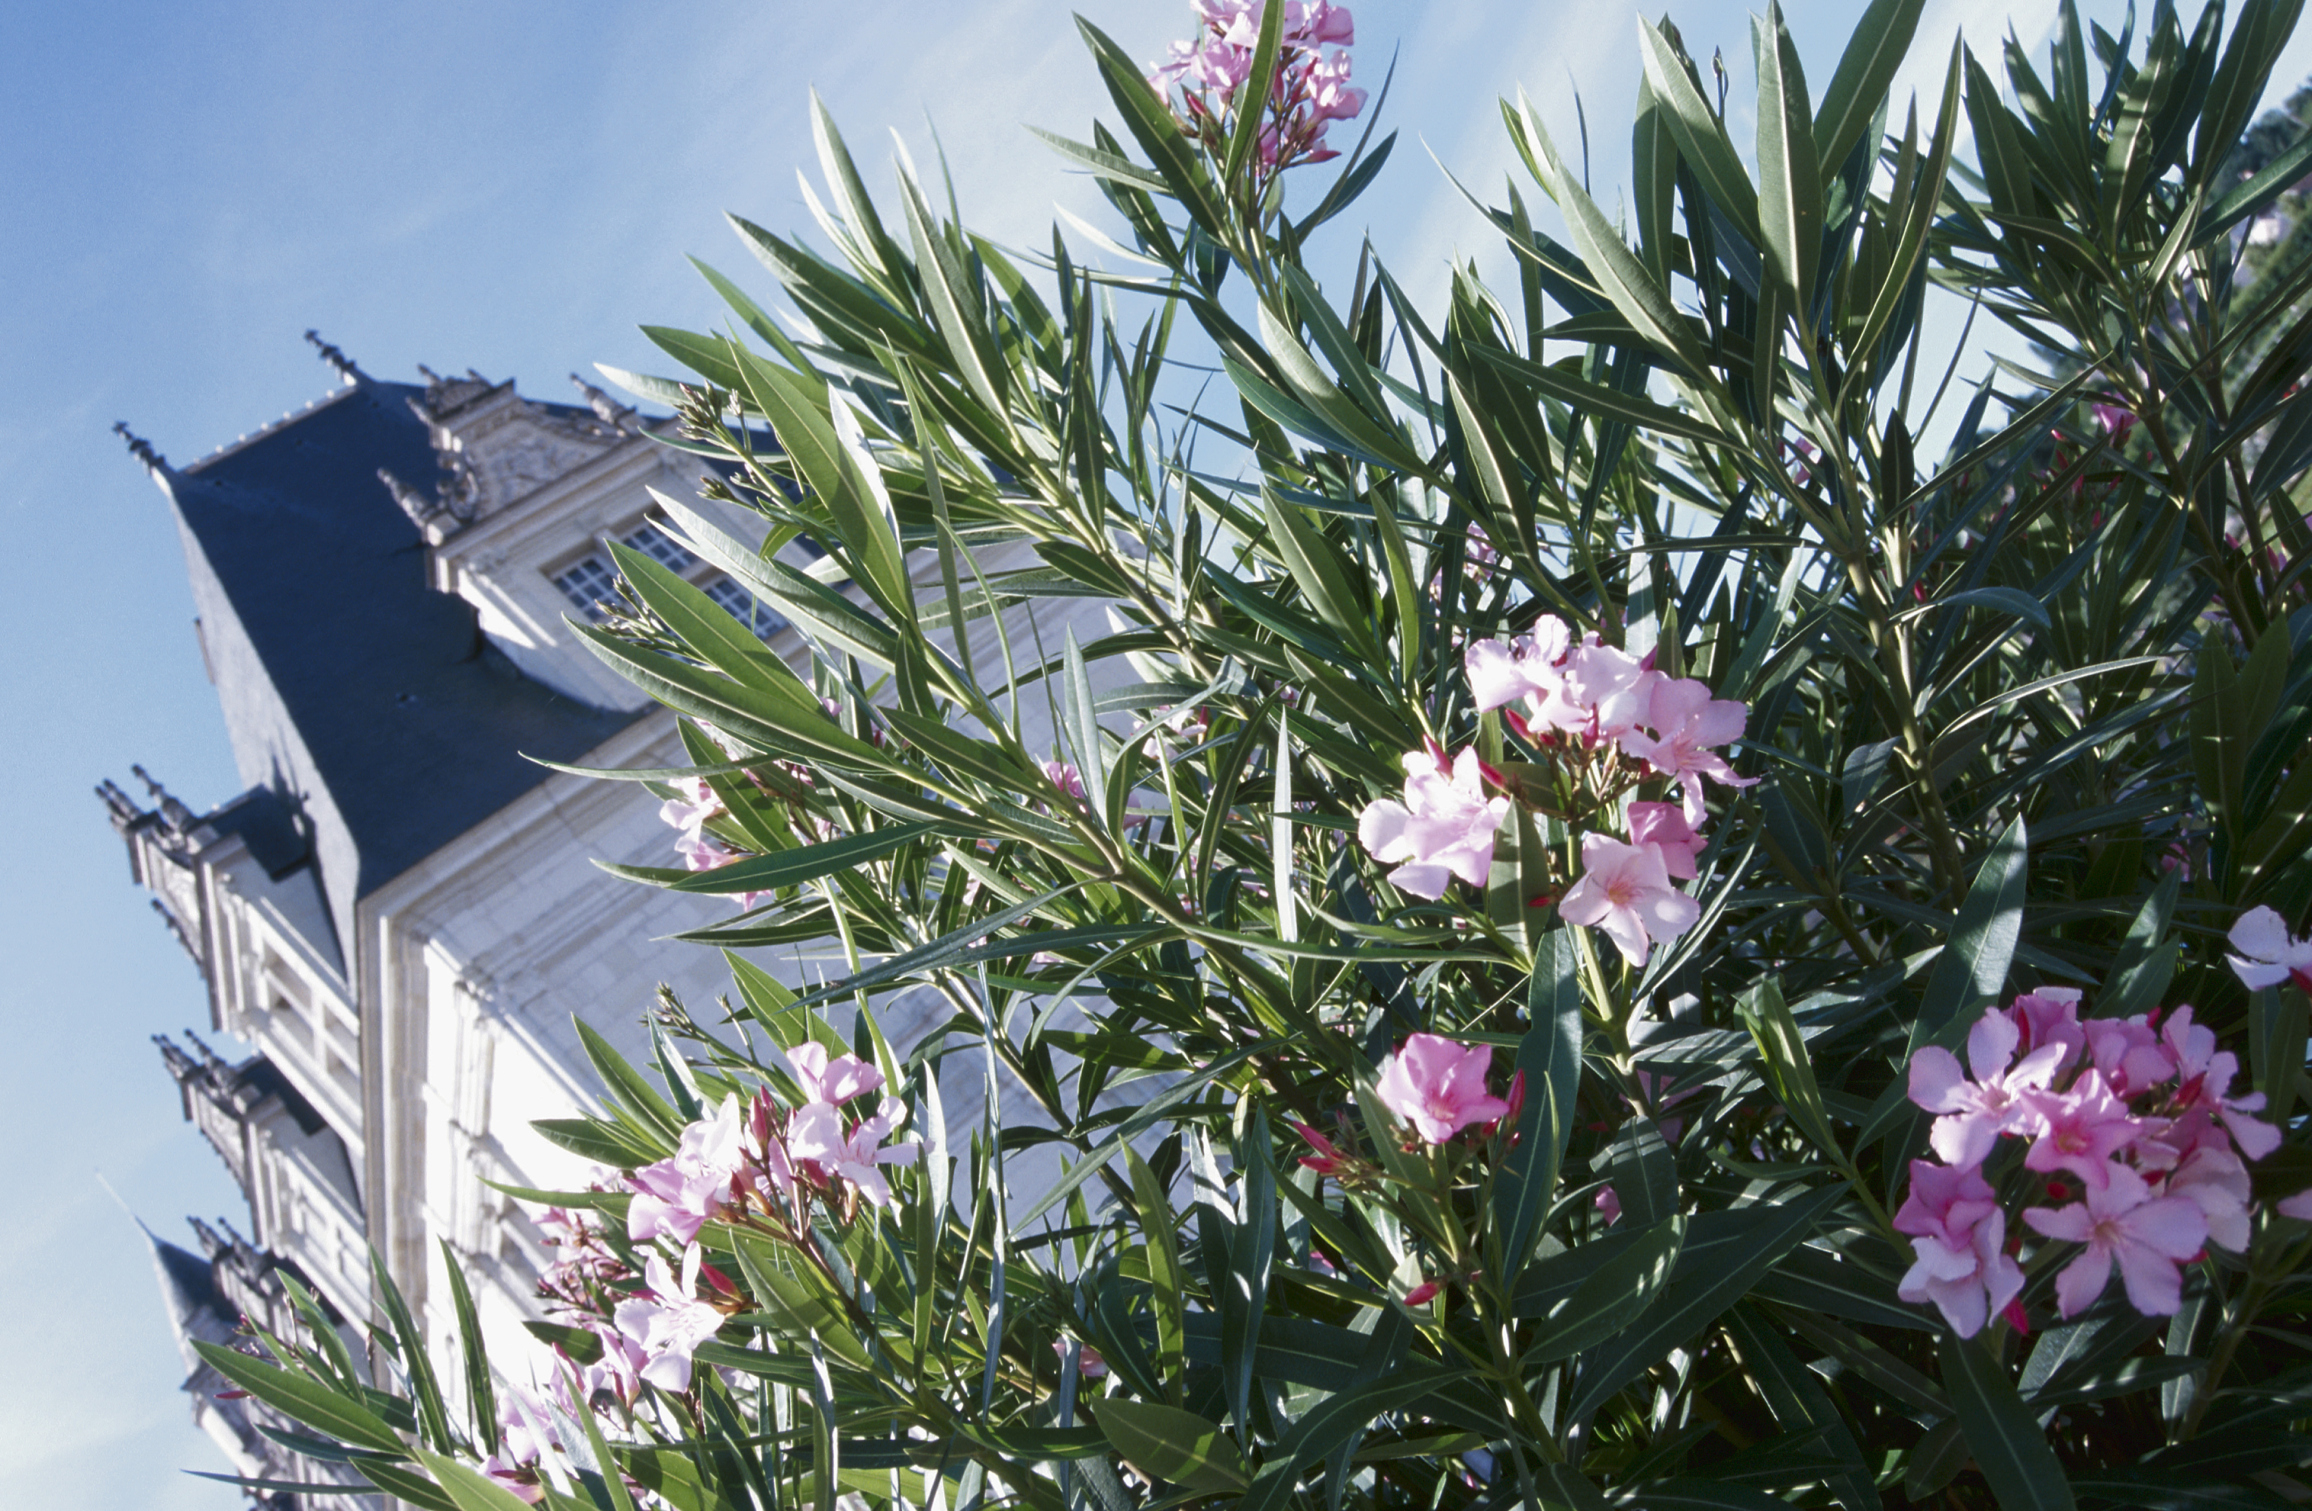 How Toxic Is Oleander to Humans? | Home Guides | SF Gate